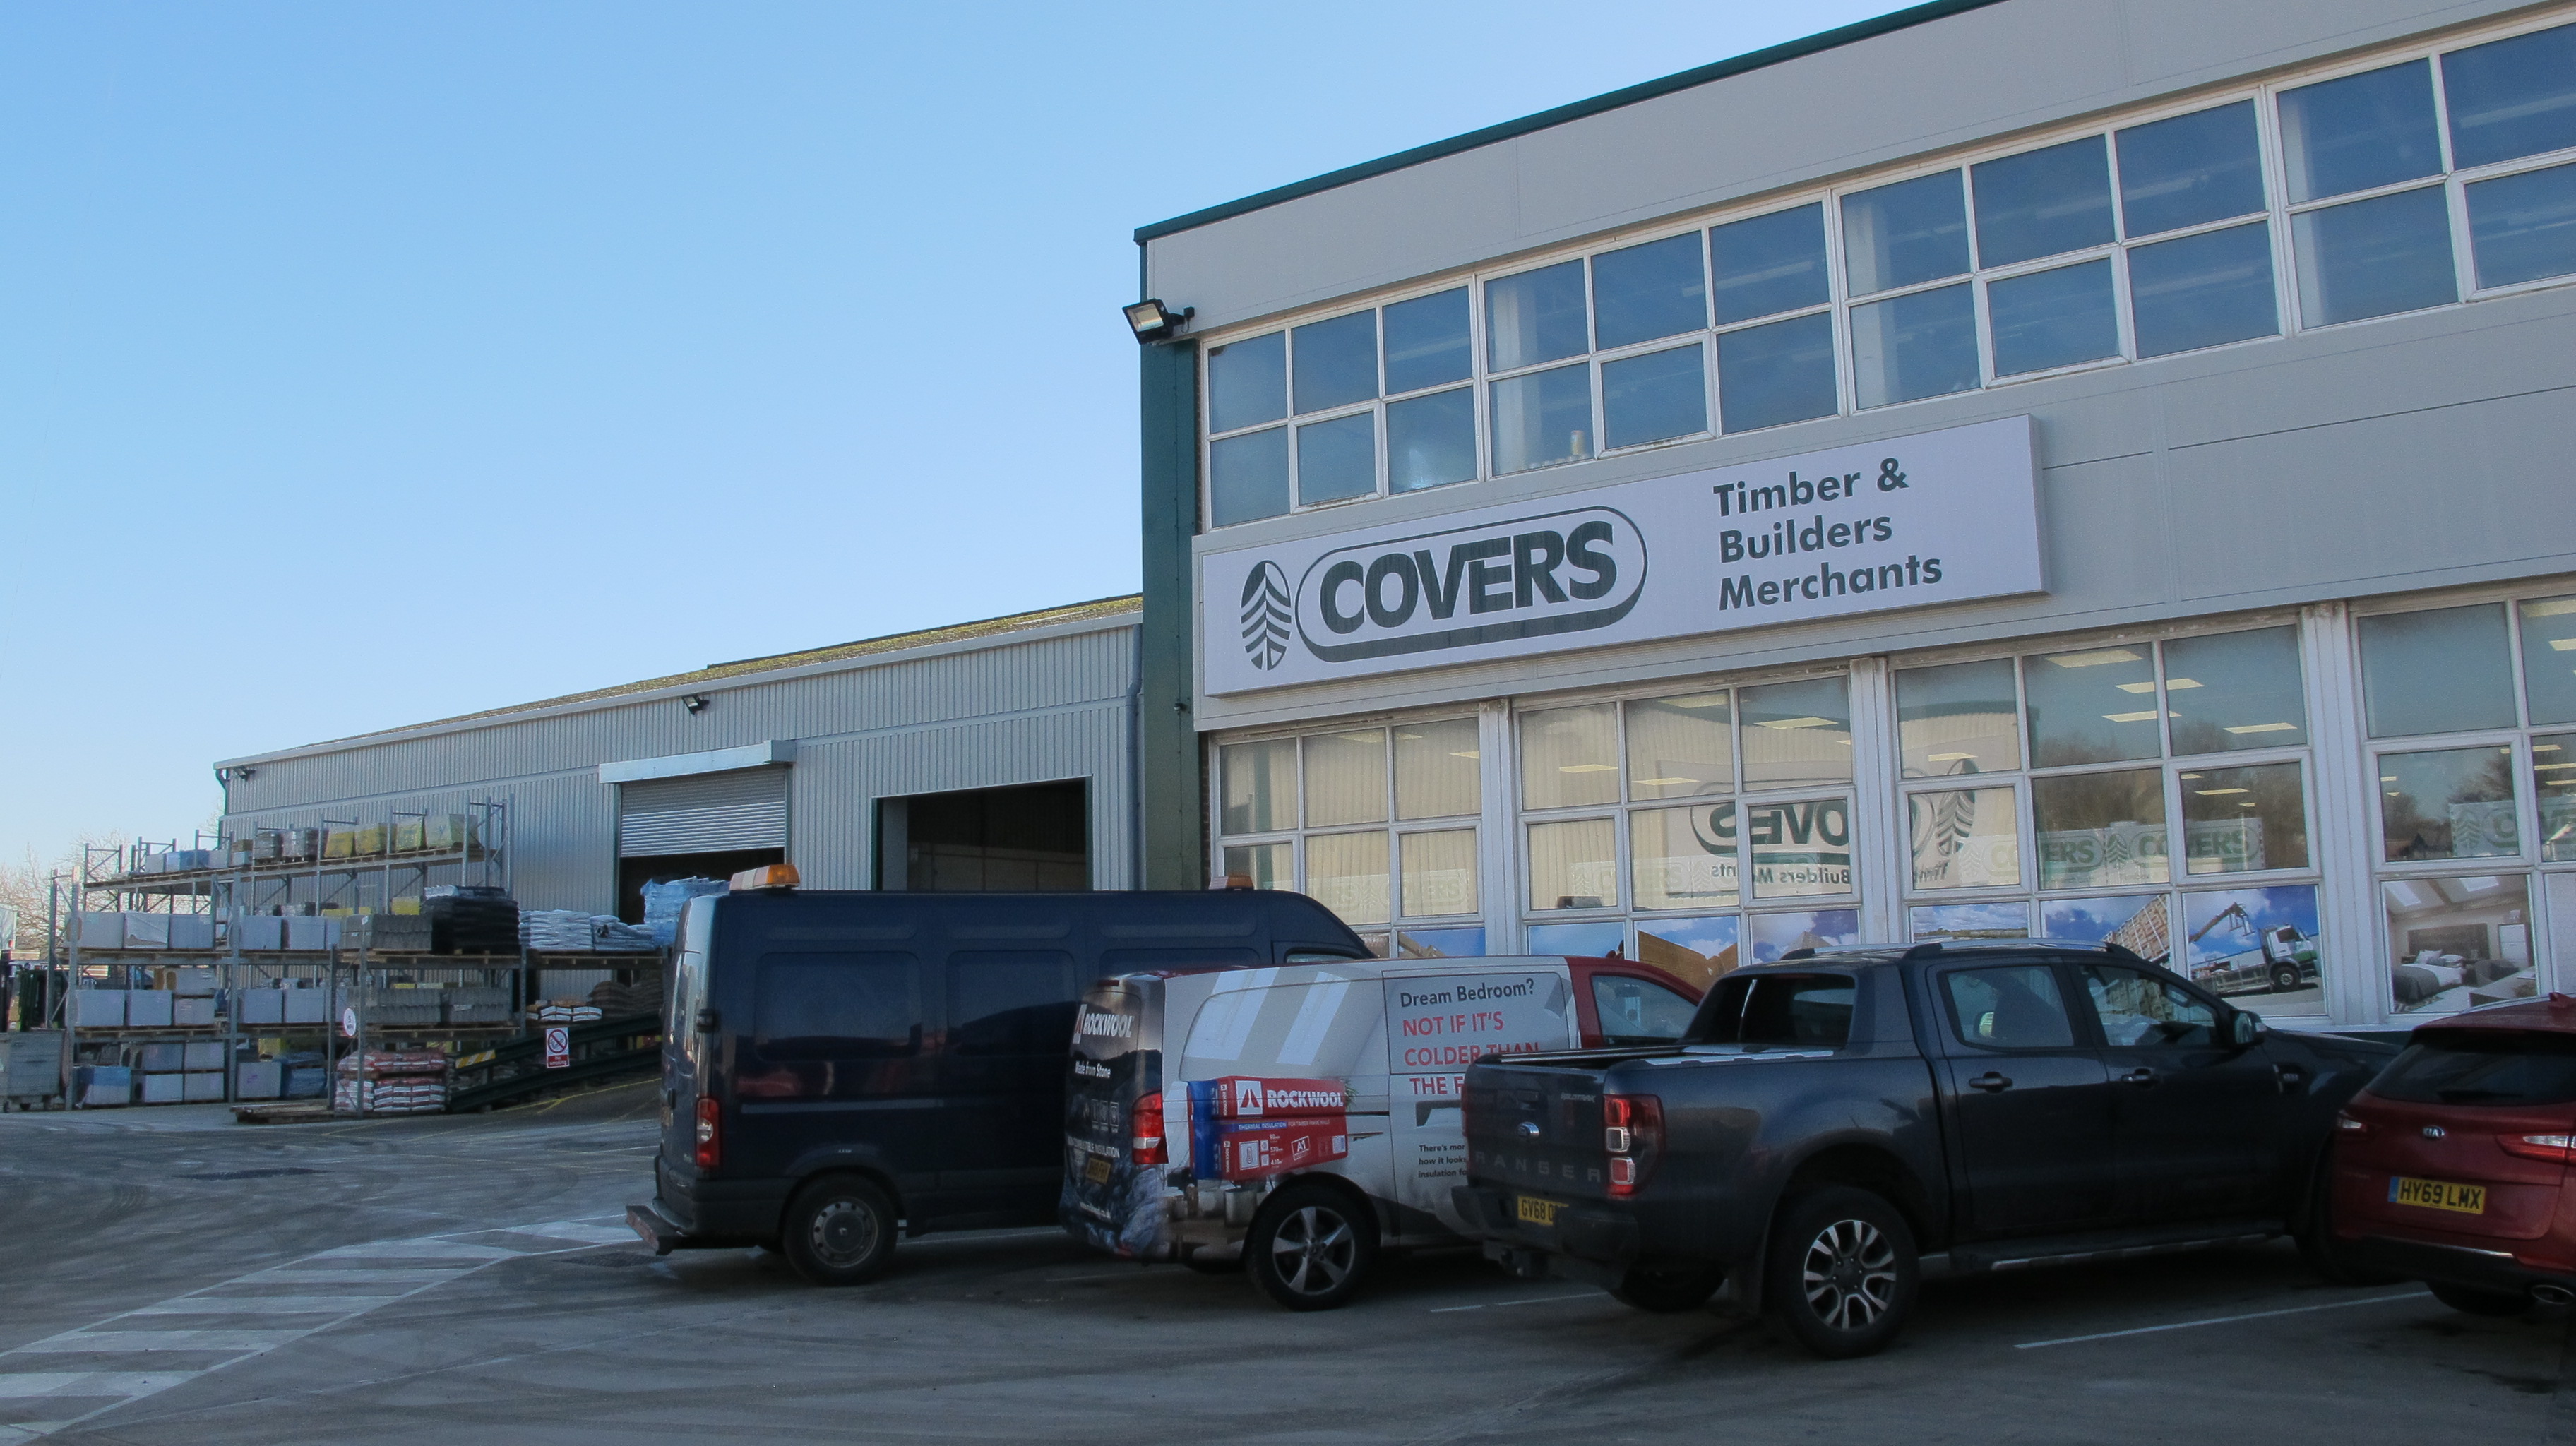 Covers launches its Anniversary Challenge & Demonstration Mornings